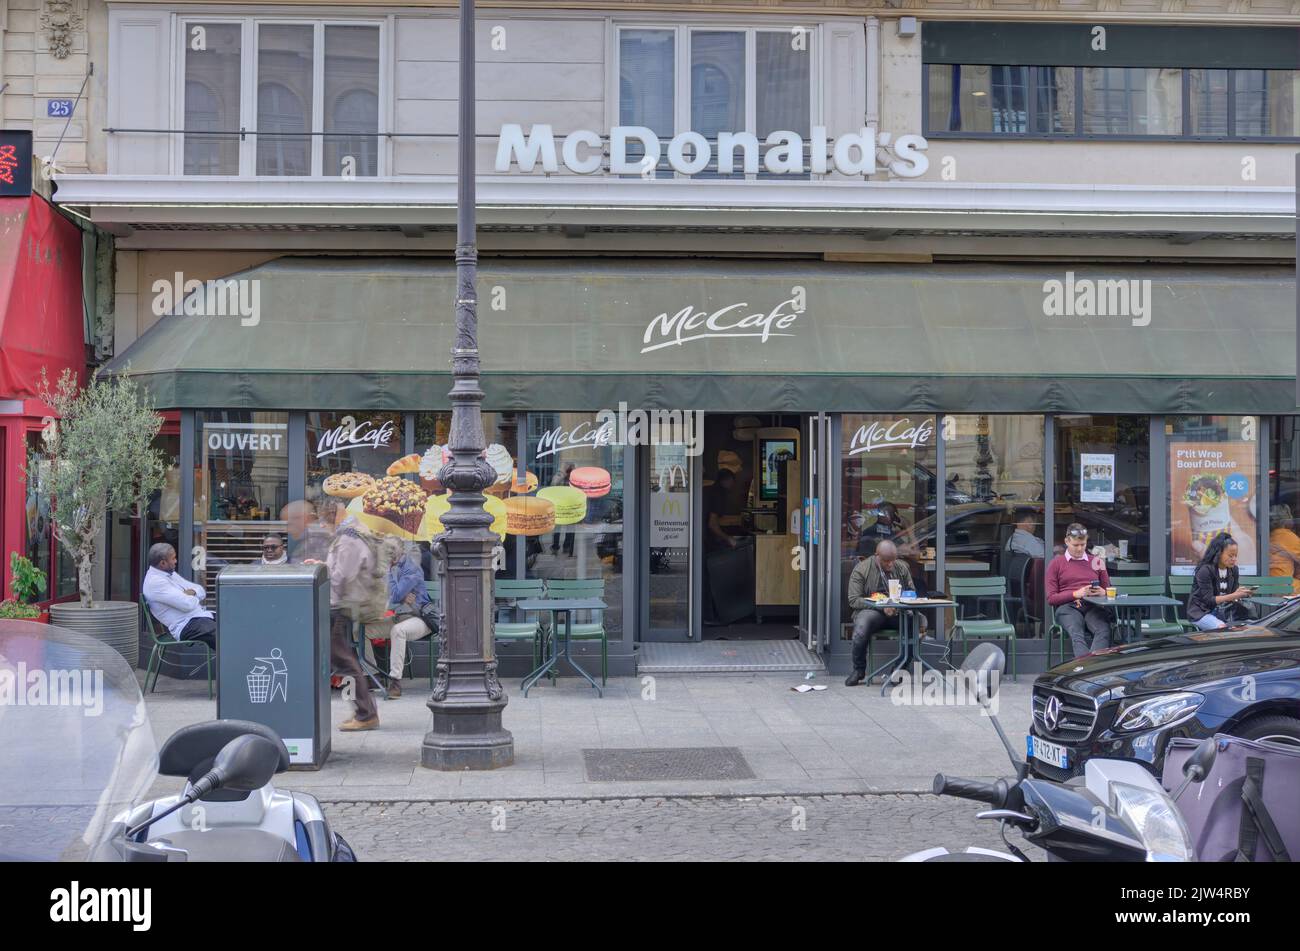 Paris, France - May 30, 2022: Exterior of McDonald's restaurant (McCafe) opposite Gare du Nord rail station with customers and motion blurred pedestri Stock Photo